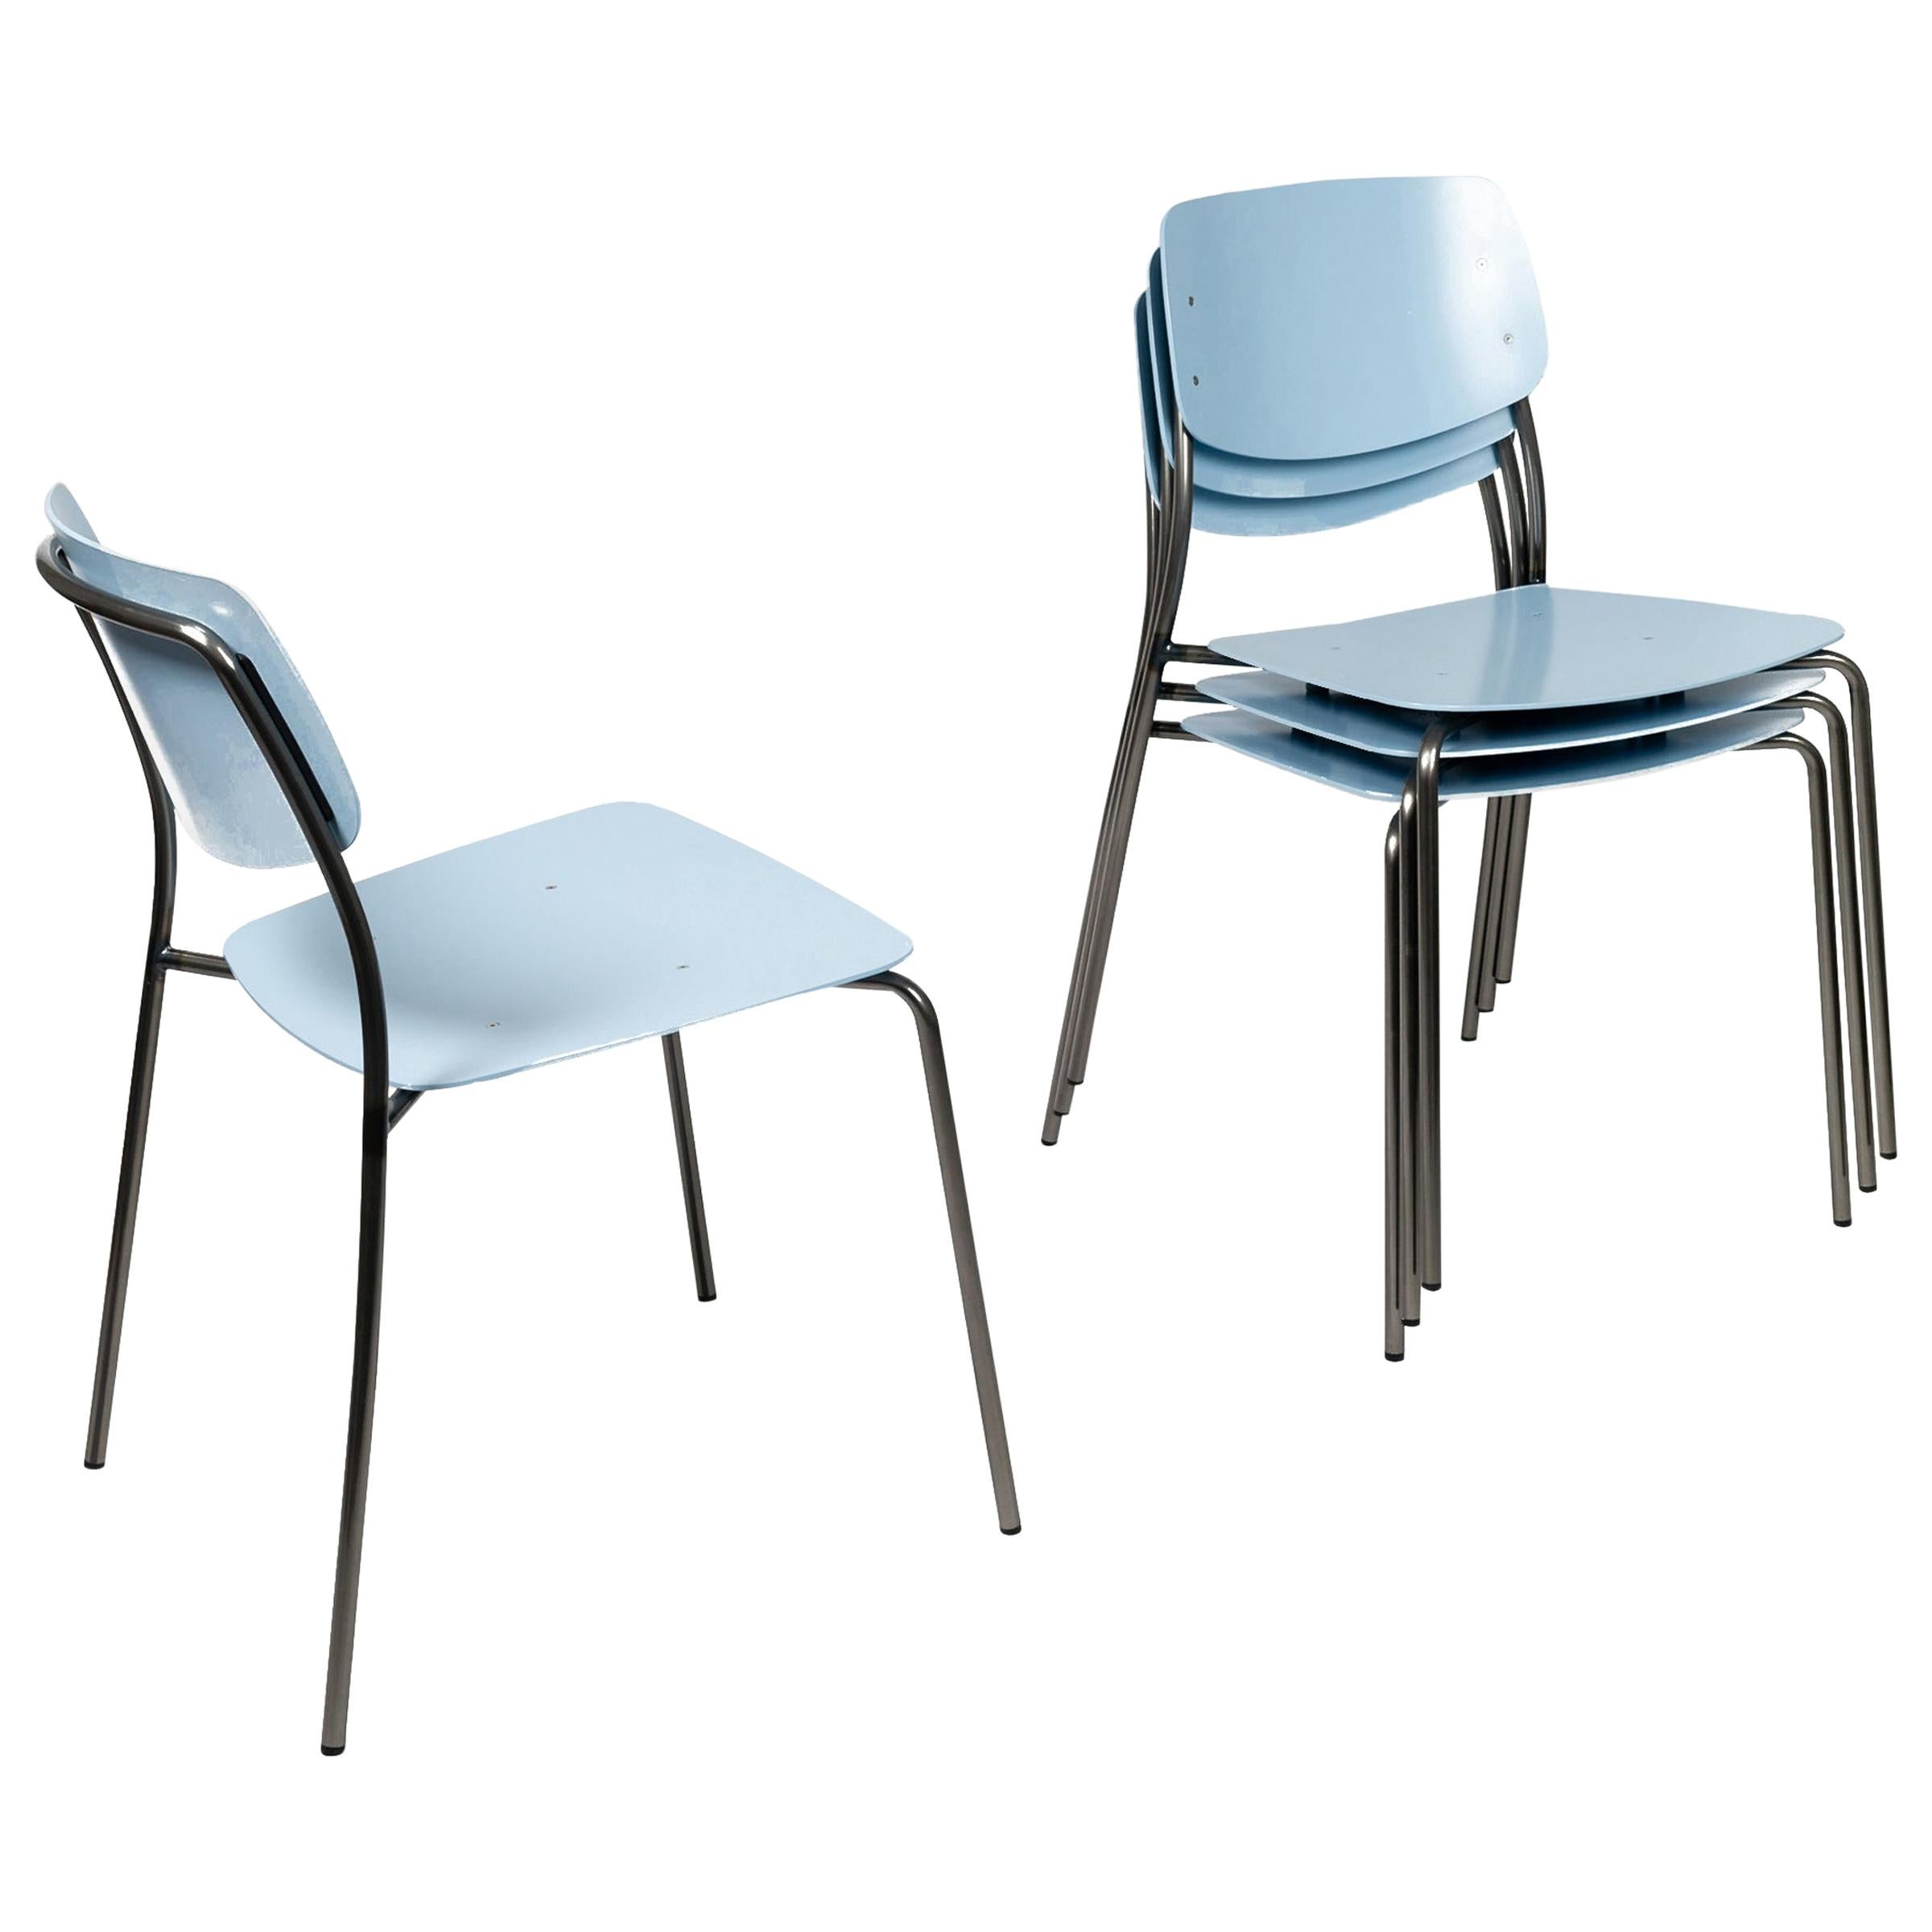 Felber C18 is the perfect weather-resistant versatile chair. With its robust powder coating, this timeless Classic chair is resistant to wind and variating weather conditions, in stock.

Made with care from durable and solid materials, aluminum